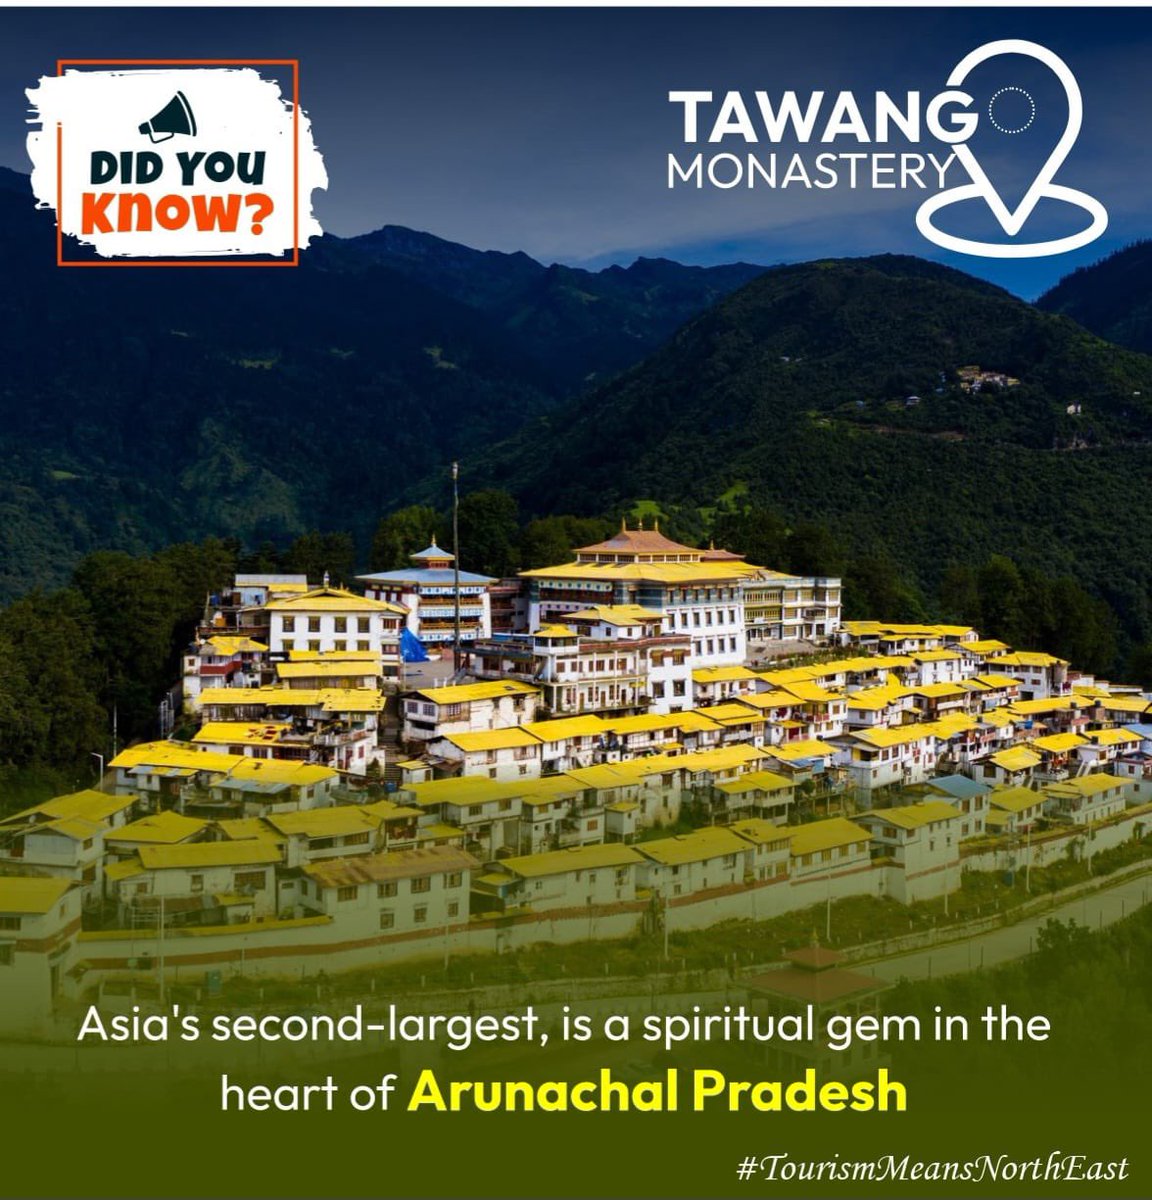 You're welcome to terrific Tawang to beat the summer heat in the lap of nature's grandeur and spiritual serenity!

Its historic monastery ~ Asia's second largest ~ encapsulates our incredible cultural legacy. Do visit.

@PMOIndia

#DekhoApnaDesh